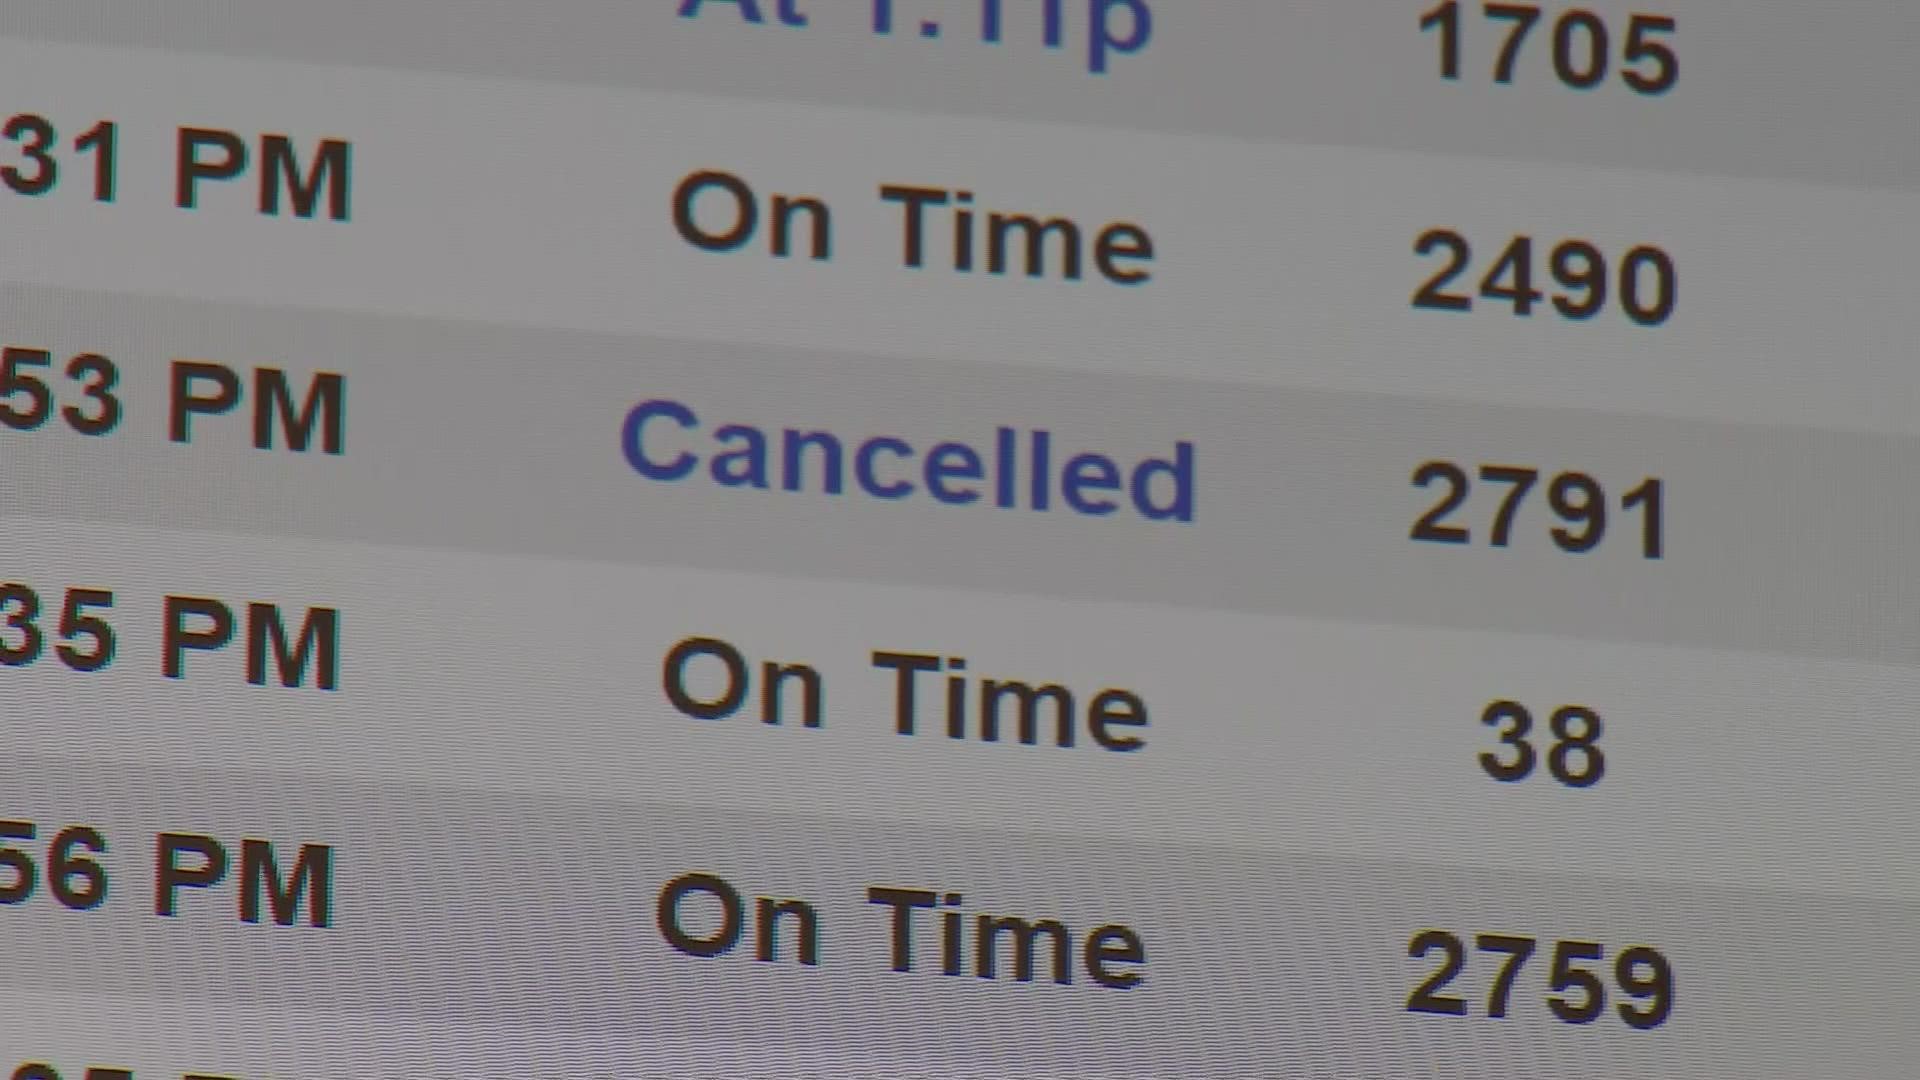 American Airlines recently led the globe with 1,500 cancellations and delays.